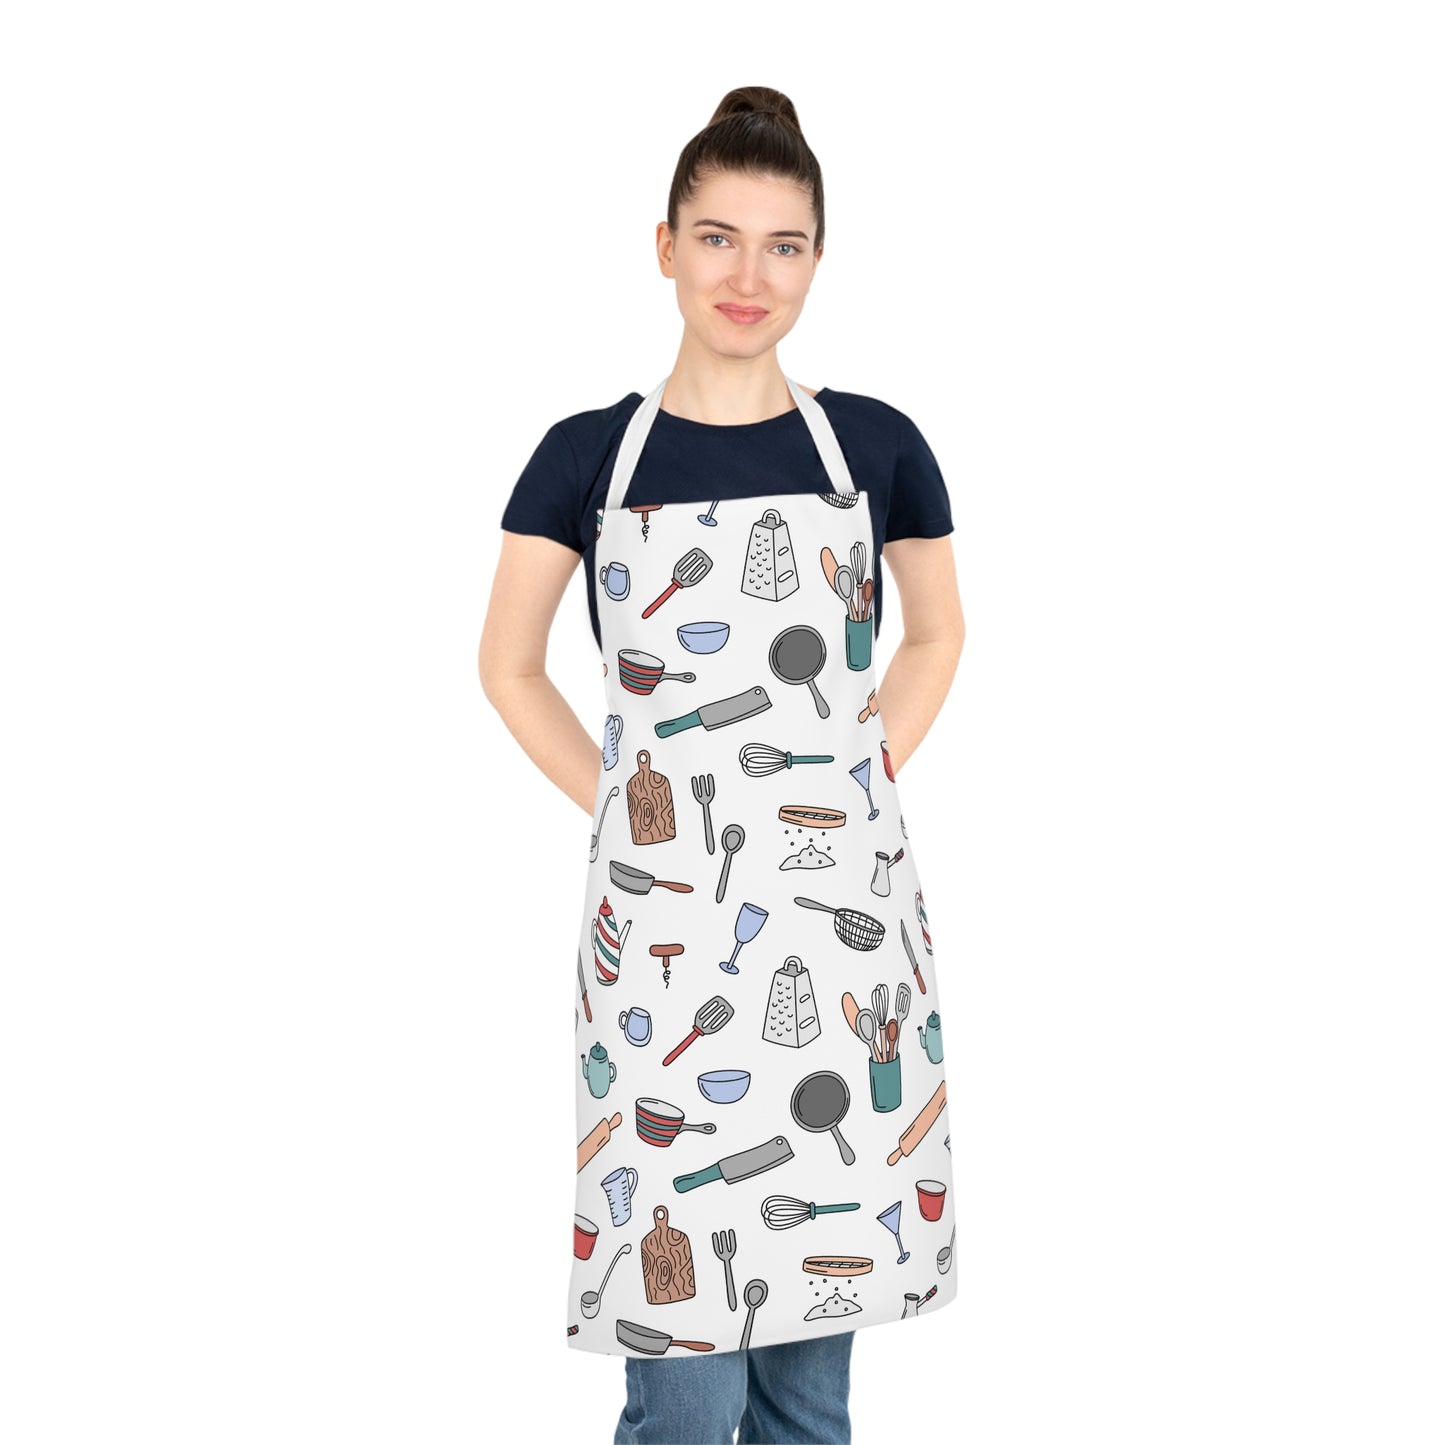 Adult Apron with Cooking Items